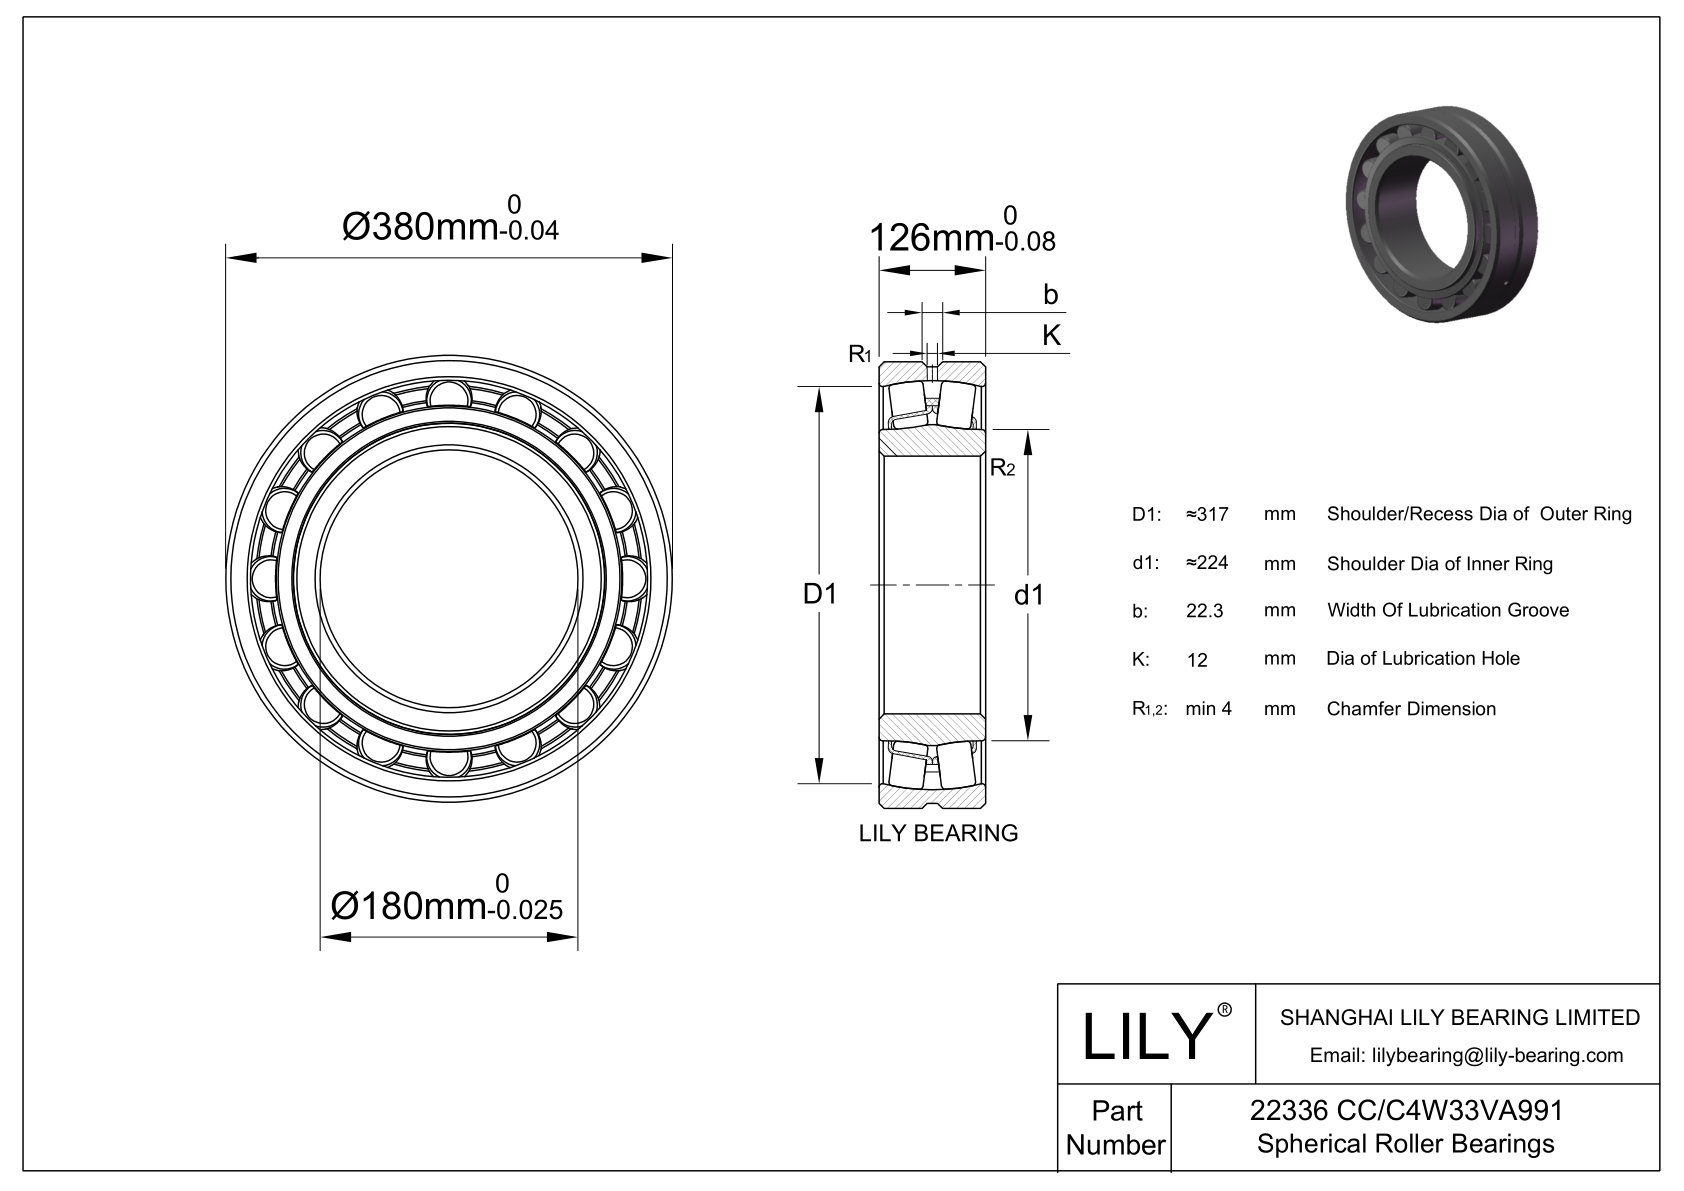 22336 CC/C4W33VA991 Double Row Spherical Roller Bearing cad drawing